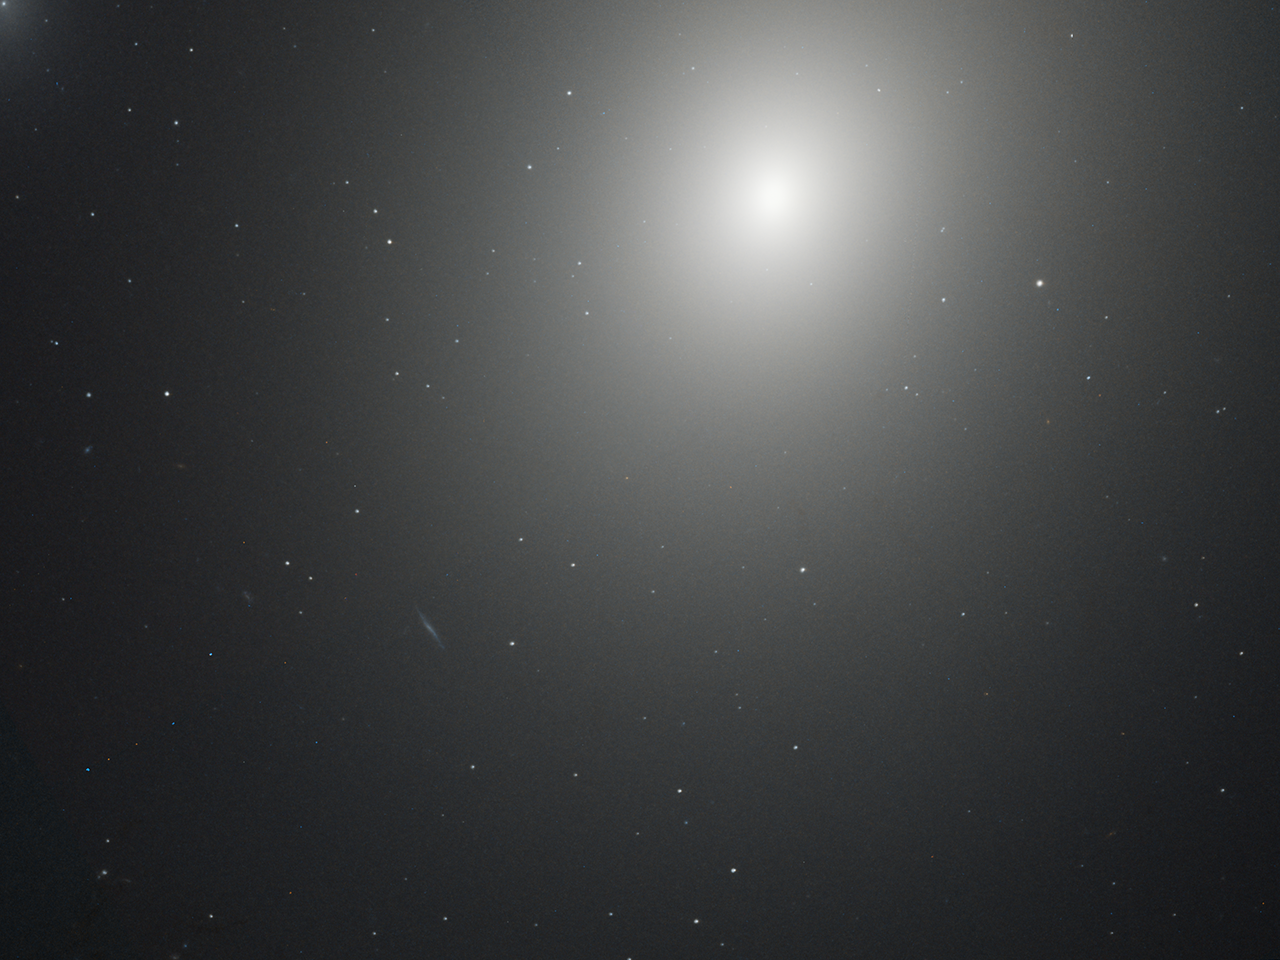 A bright, hazy point of white light shines near the top center of the image, against black space dotted with distant stars.